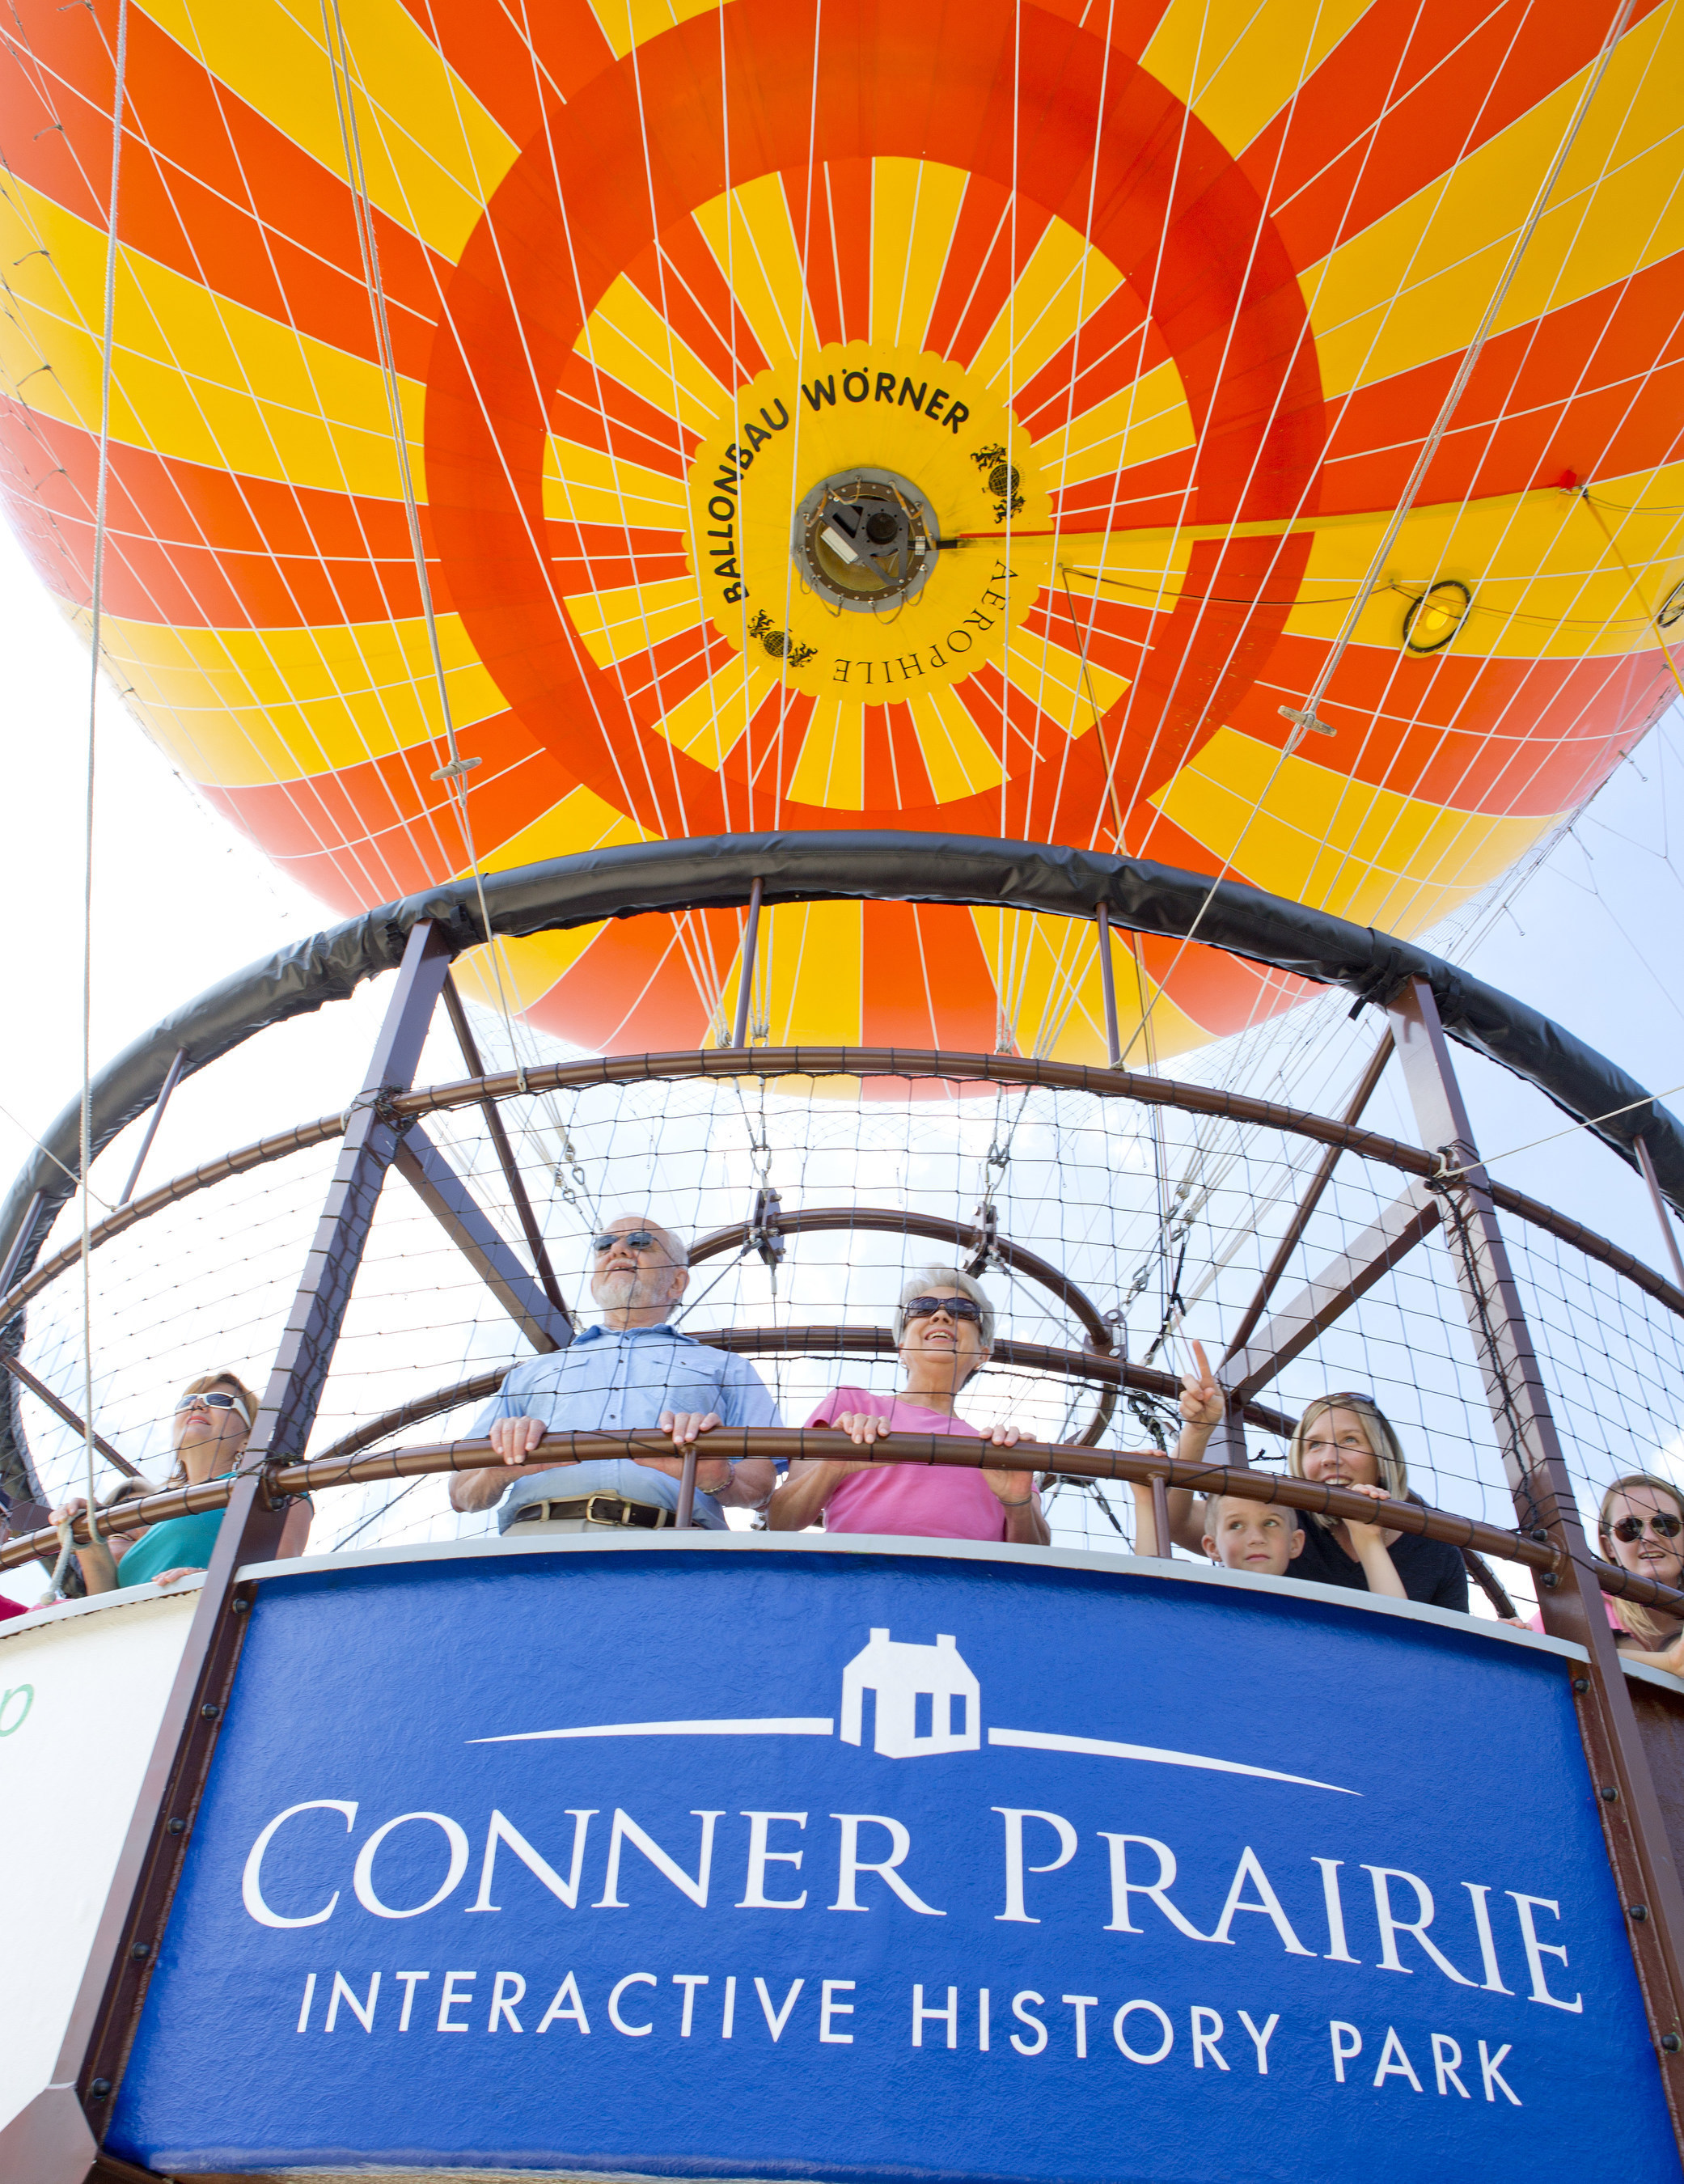 Indiana-headquartered Reynolds Farm Equipment is the new presenting sponsor of the 1859 Balloon Voyage experience at Conner Prairie, an interactive history park north of Indianapolis that draws 360,000 visitors annually. The company will provide $375,000 to sponsor the balloon and its new outdoor exhibit space through 2019.